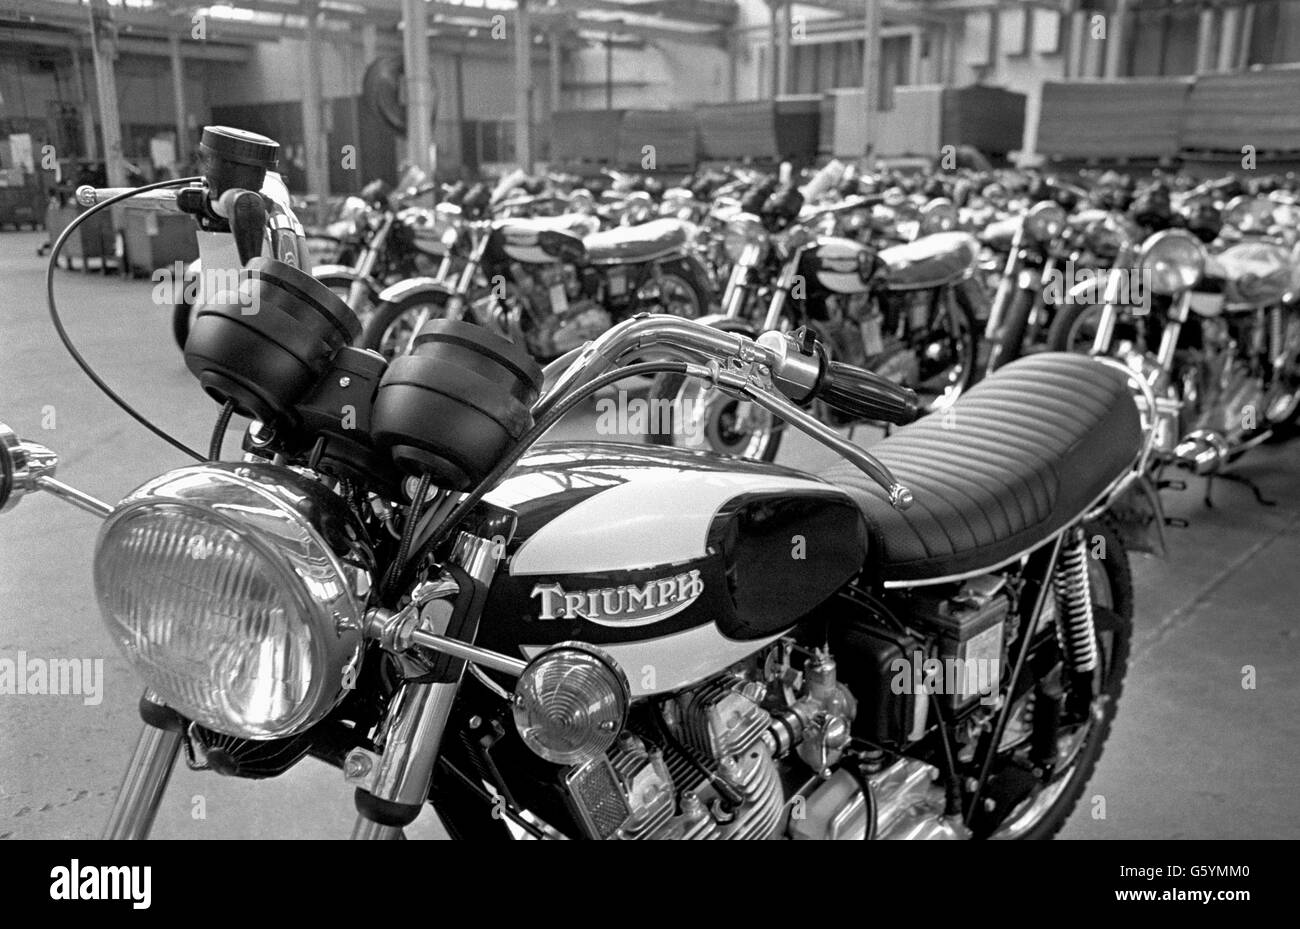 Motor cycles ready for delivery at the Small Heath plant of Norton-Villieres-Triumph, who announced that Norton-Villiers Ltd - one of the company's nine subsidiaries - is to go into liquidation following the government's decision not to pump any more money into the motor cycles group. Stock Photo